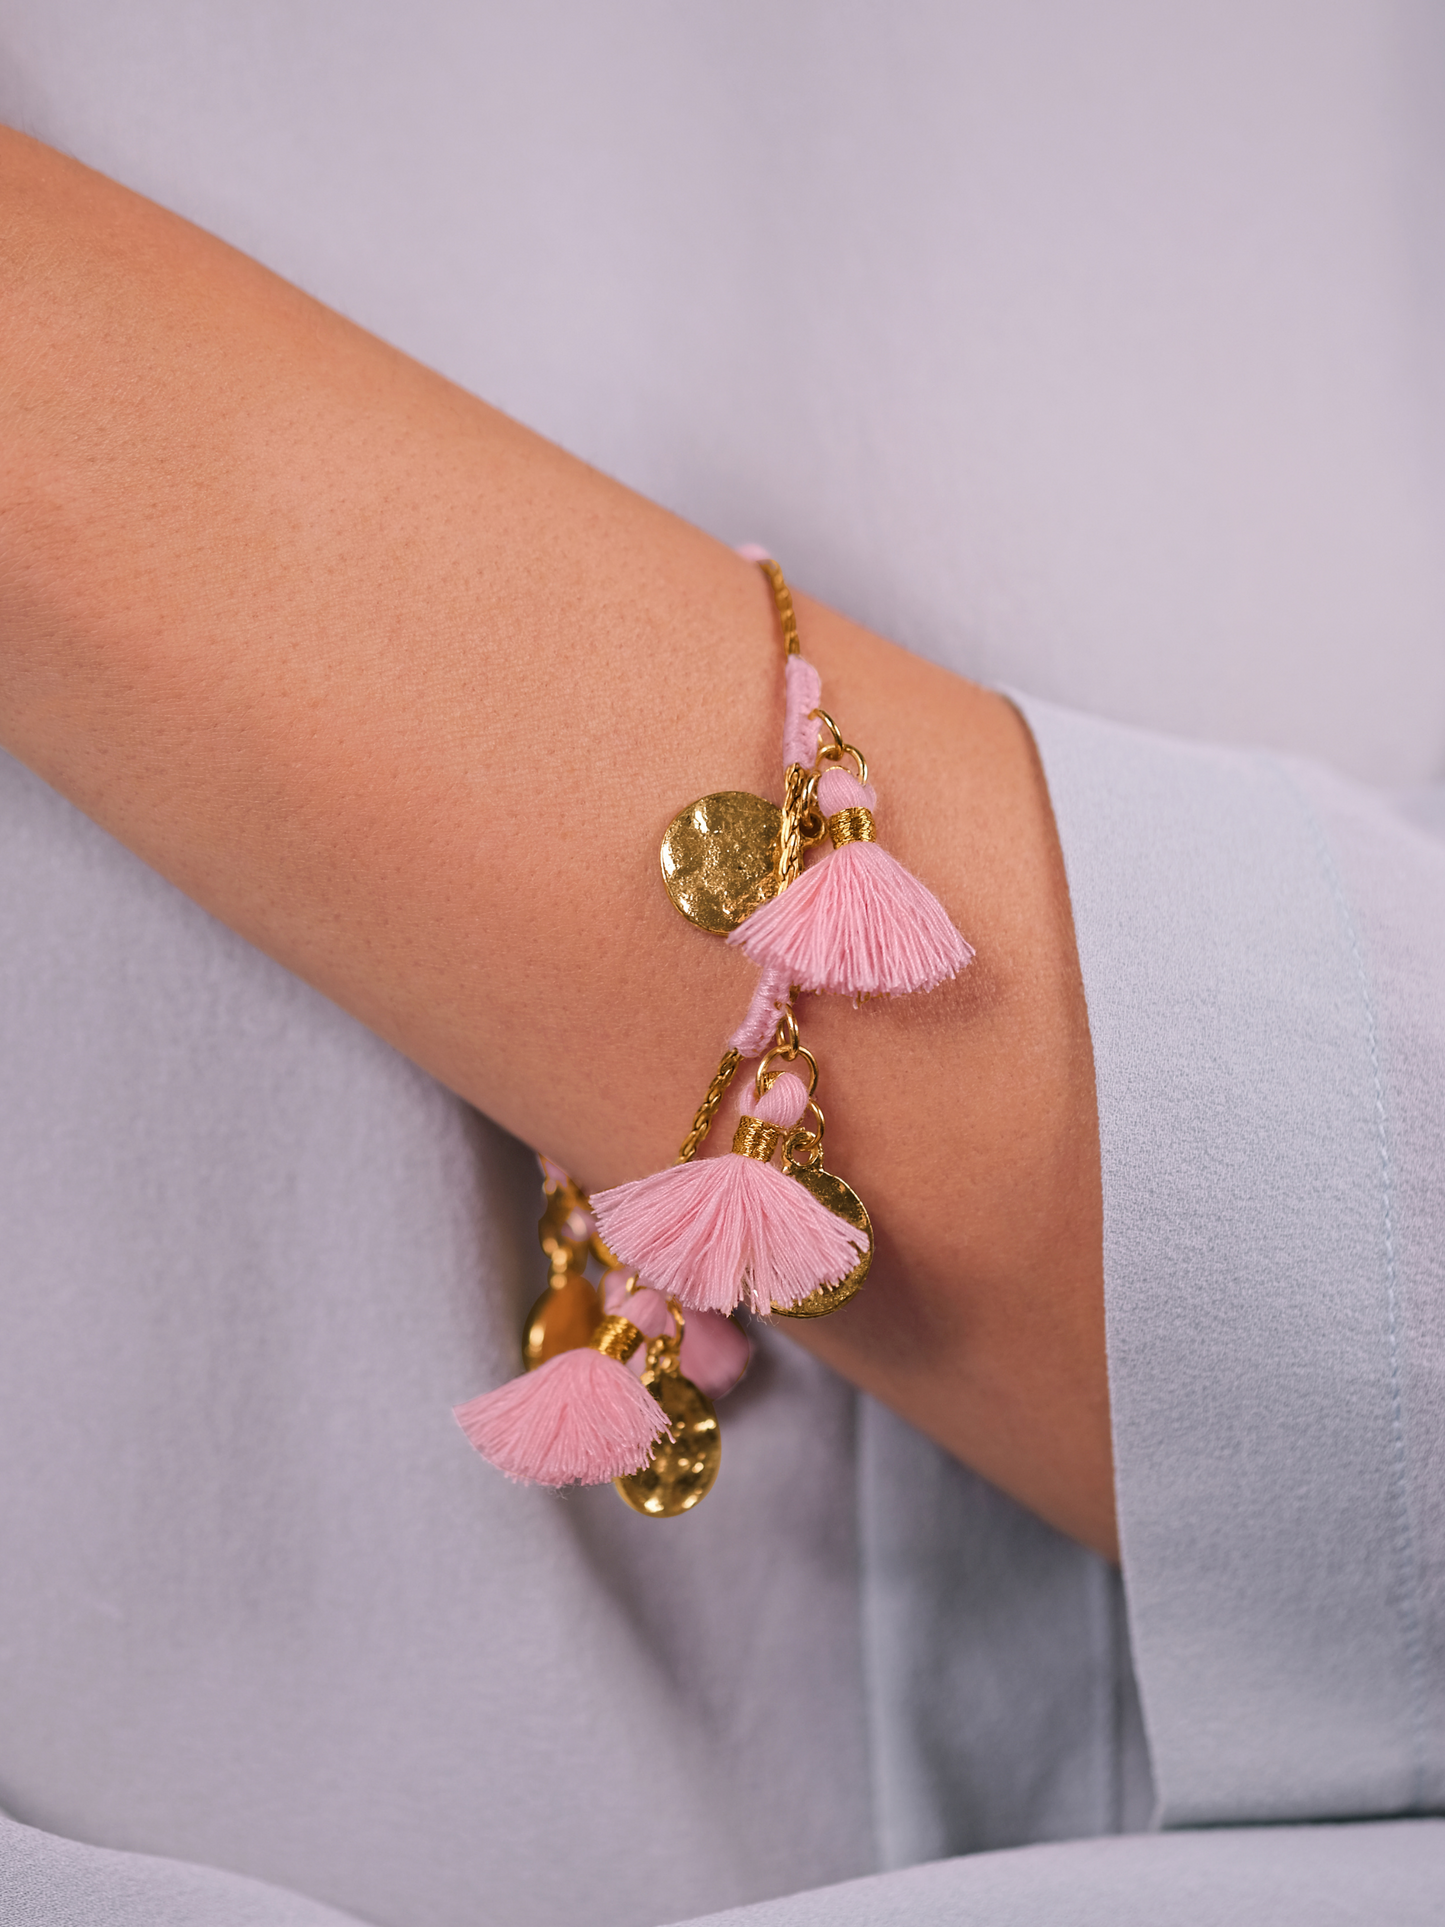 Bohemian Bracelet with Candy Pink Tassels by ZA Collective